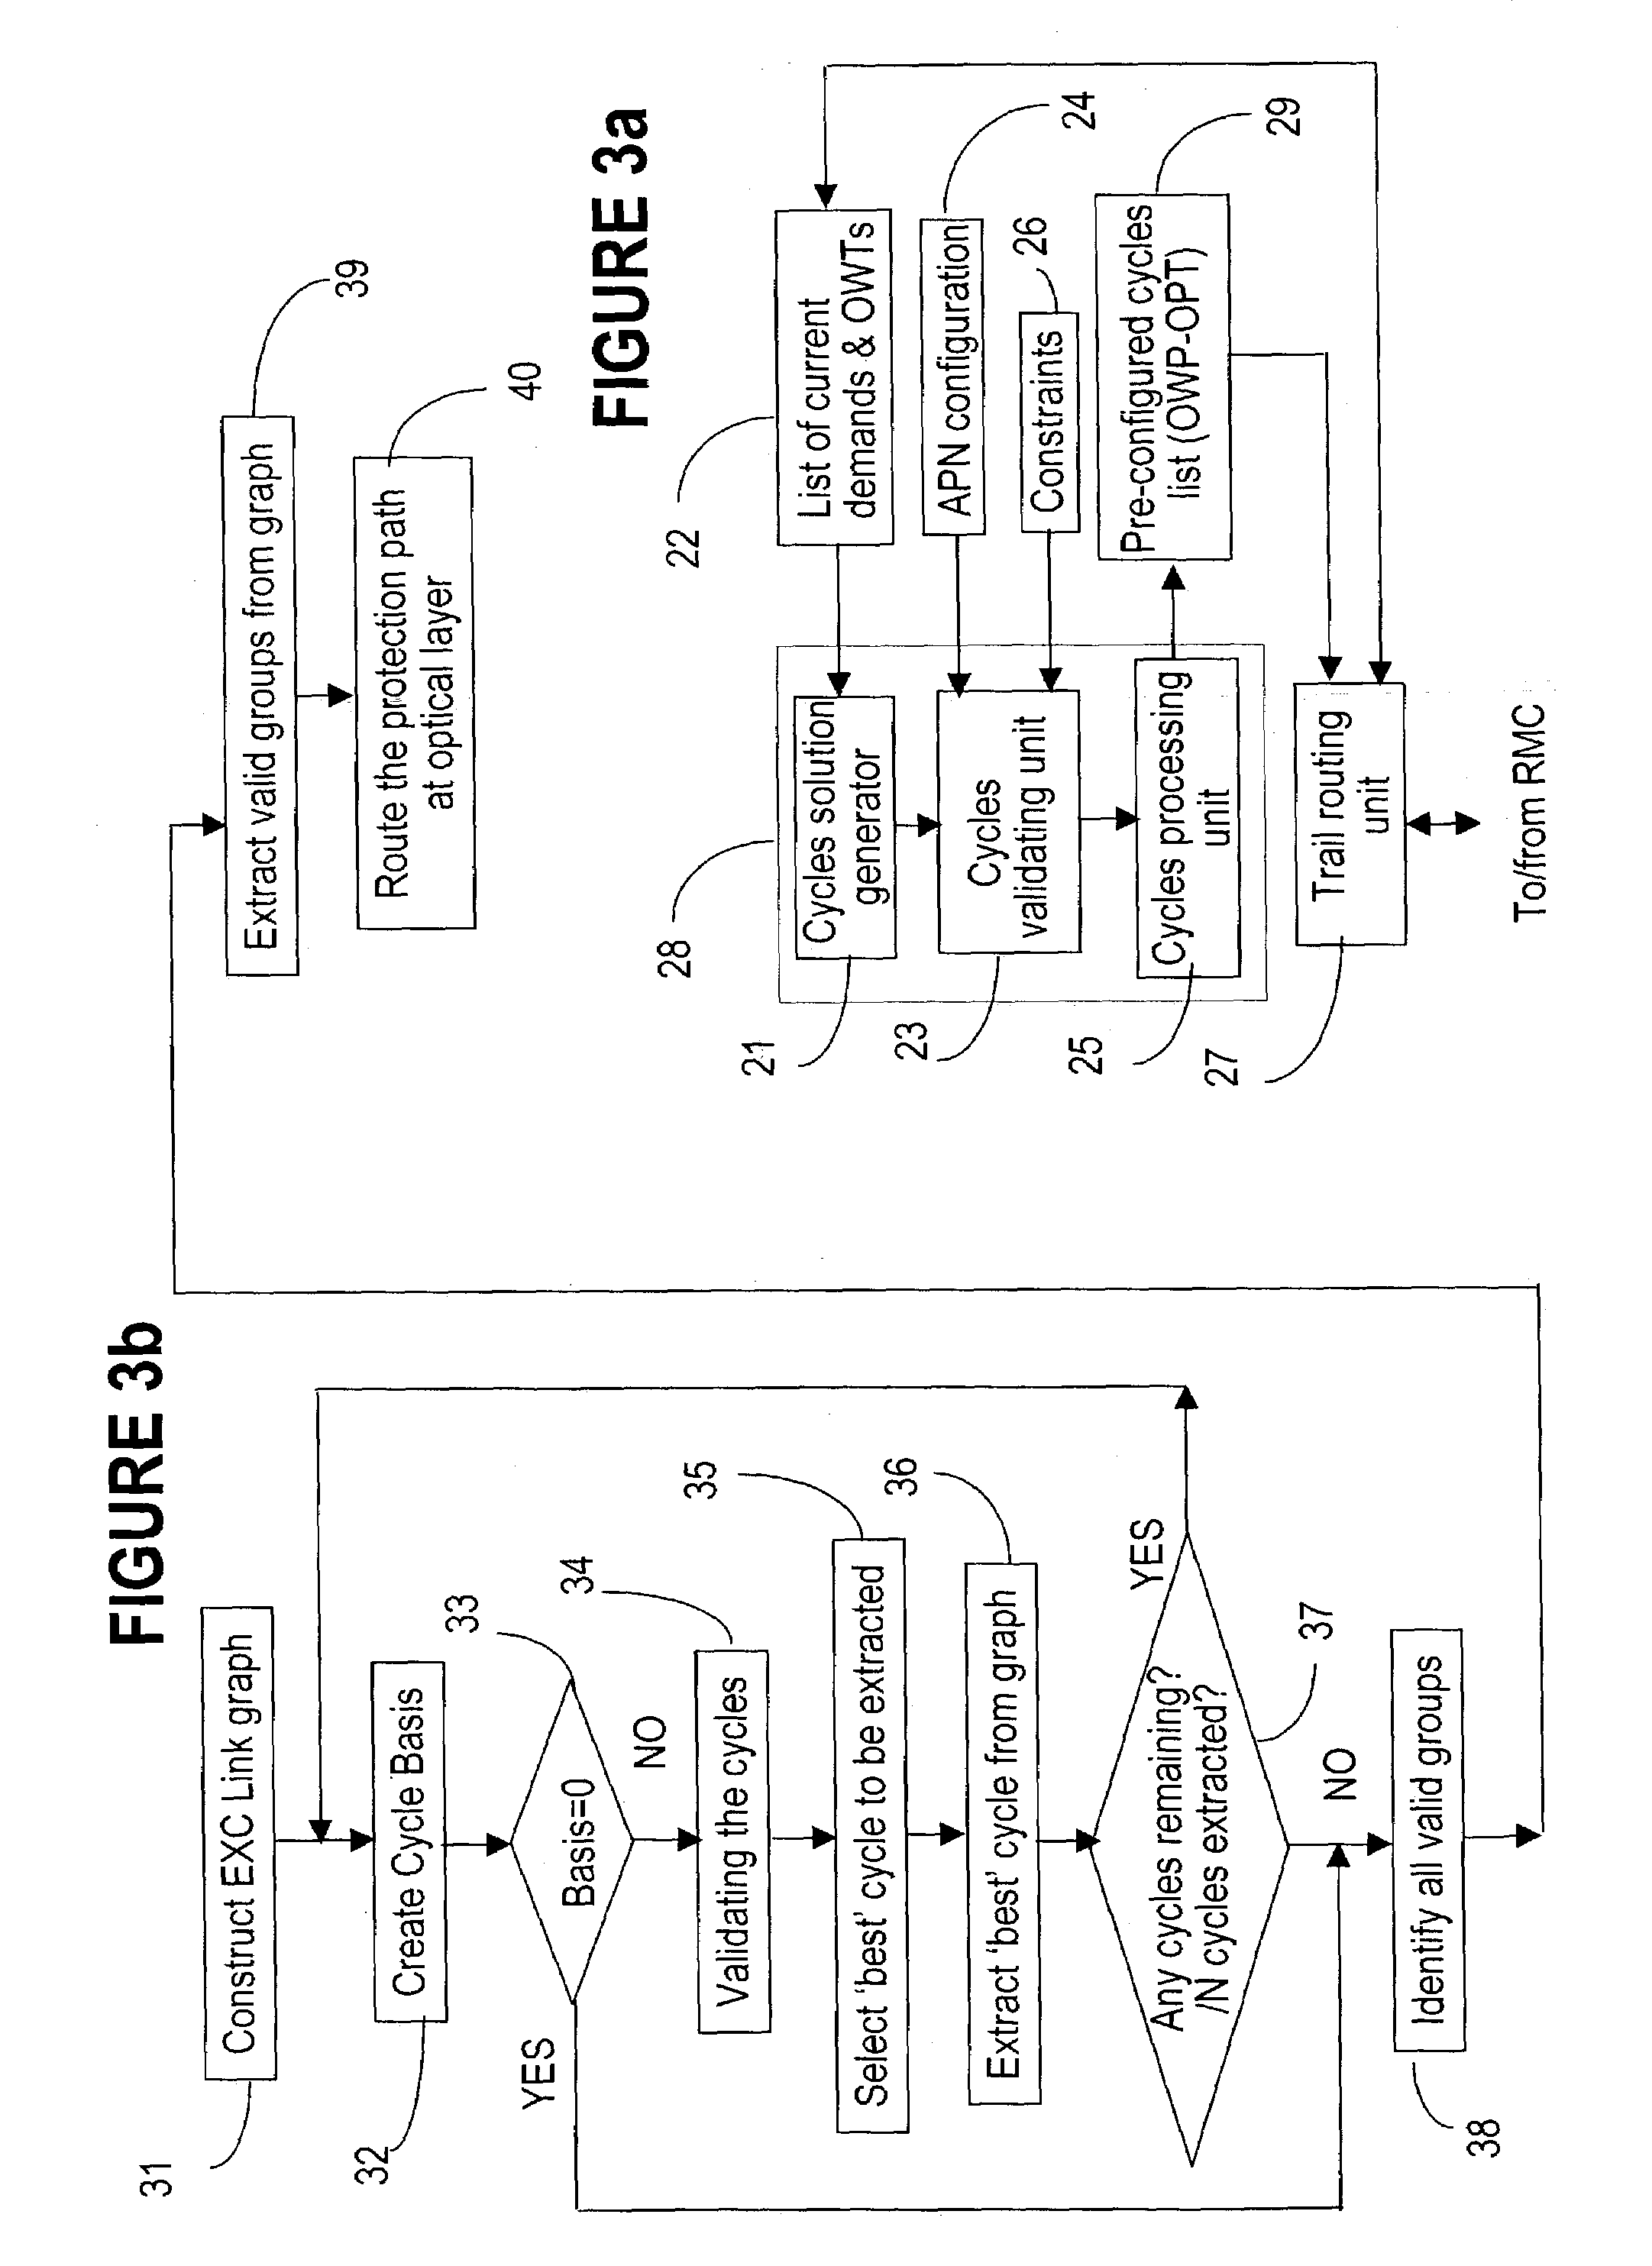 Method of preconfiguring optical protection trails in a mesh-connected agile photonic network